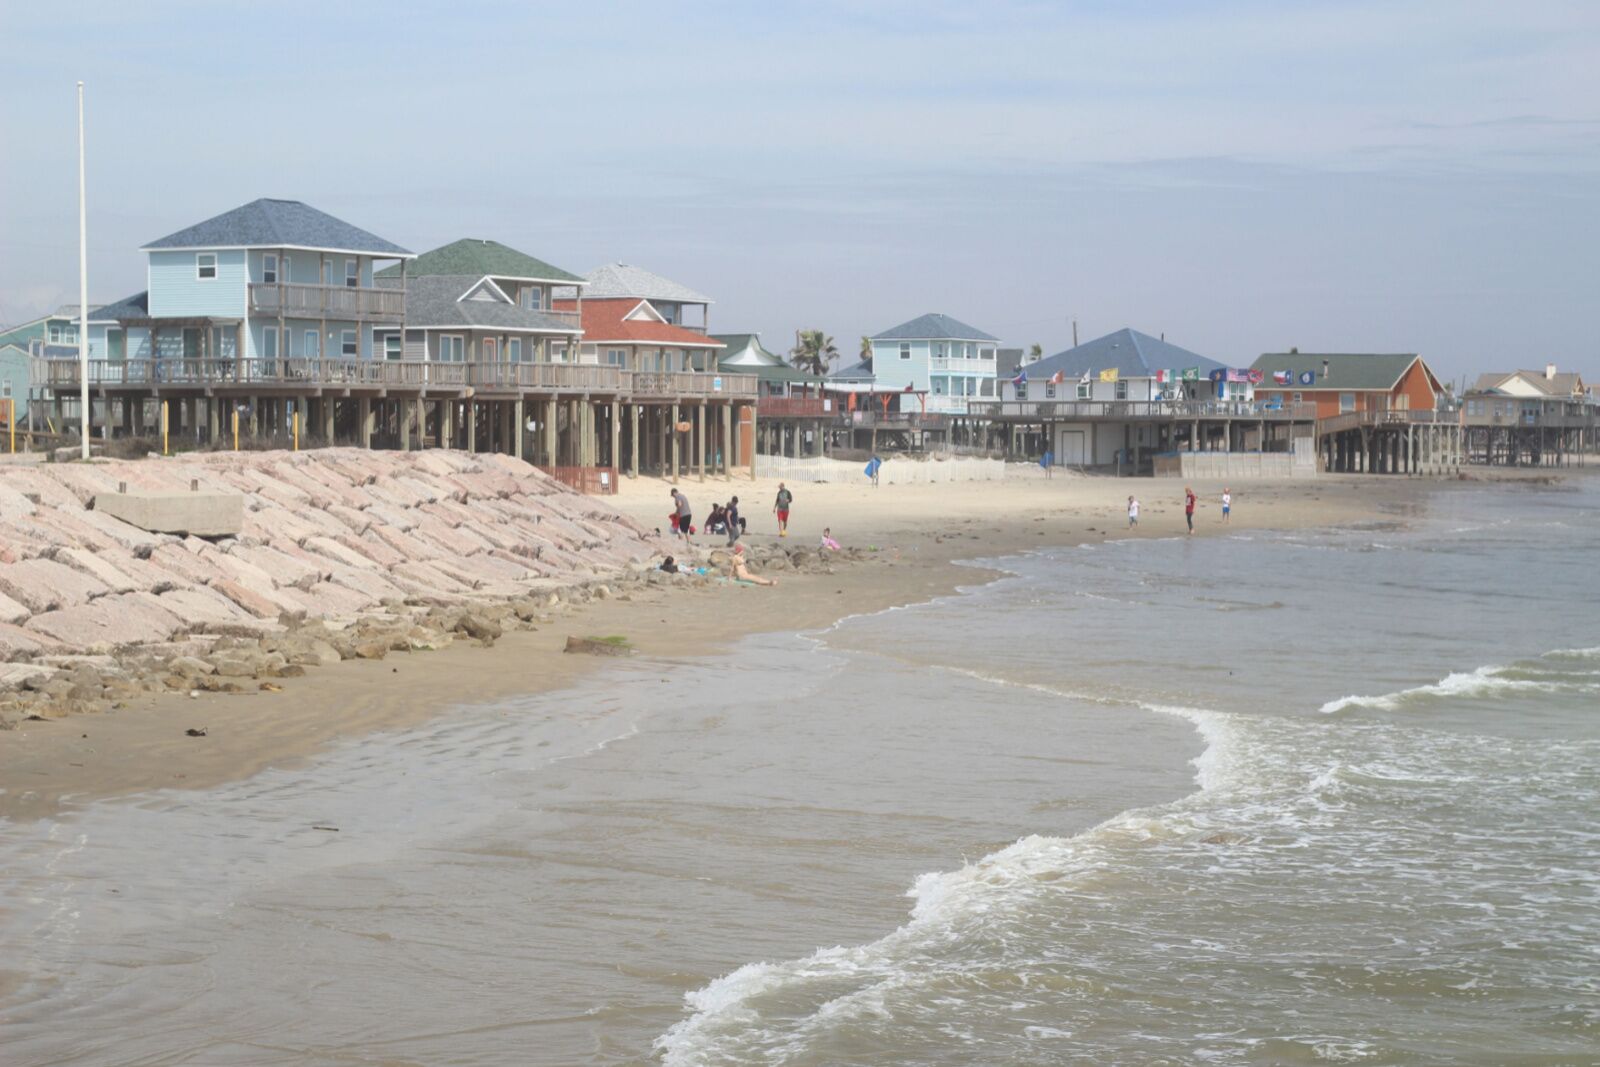 Beach view with people and beach homes